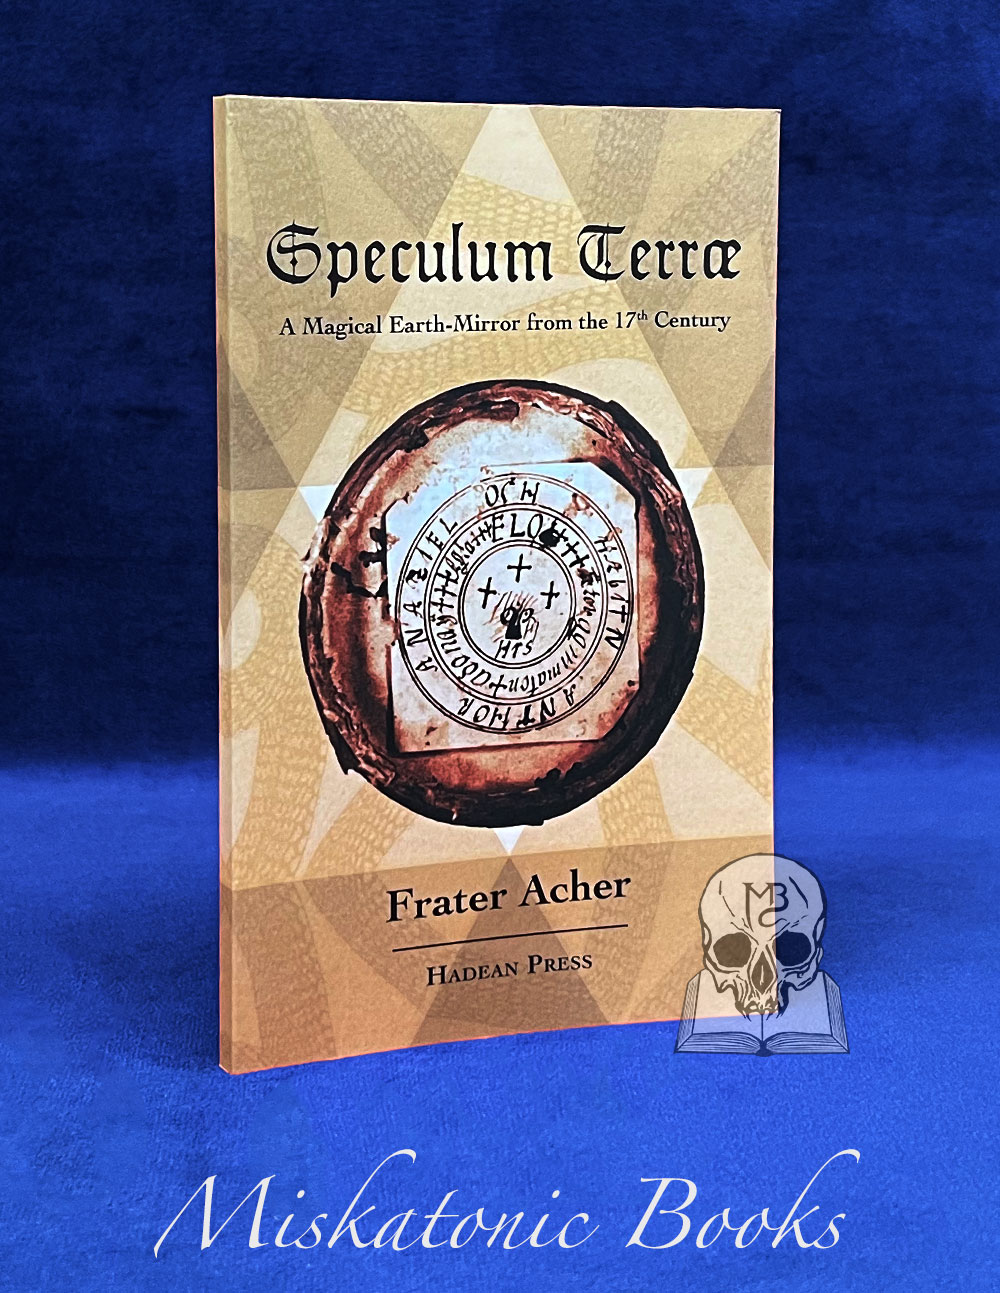 SPECULUM TERRÆ: A Magical Earth-Mirror from the 17th Century by Frater Acher - Paperback Edition